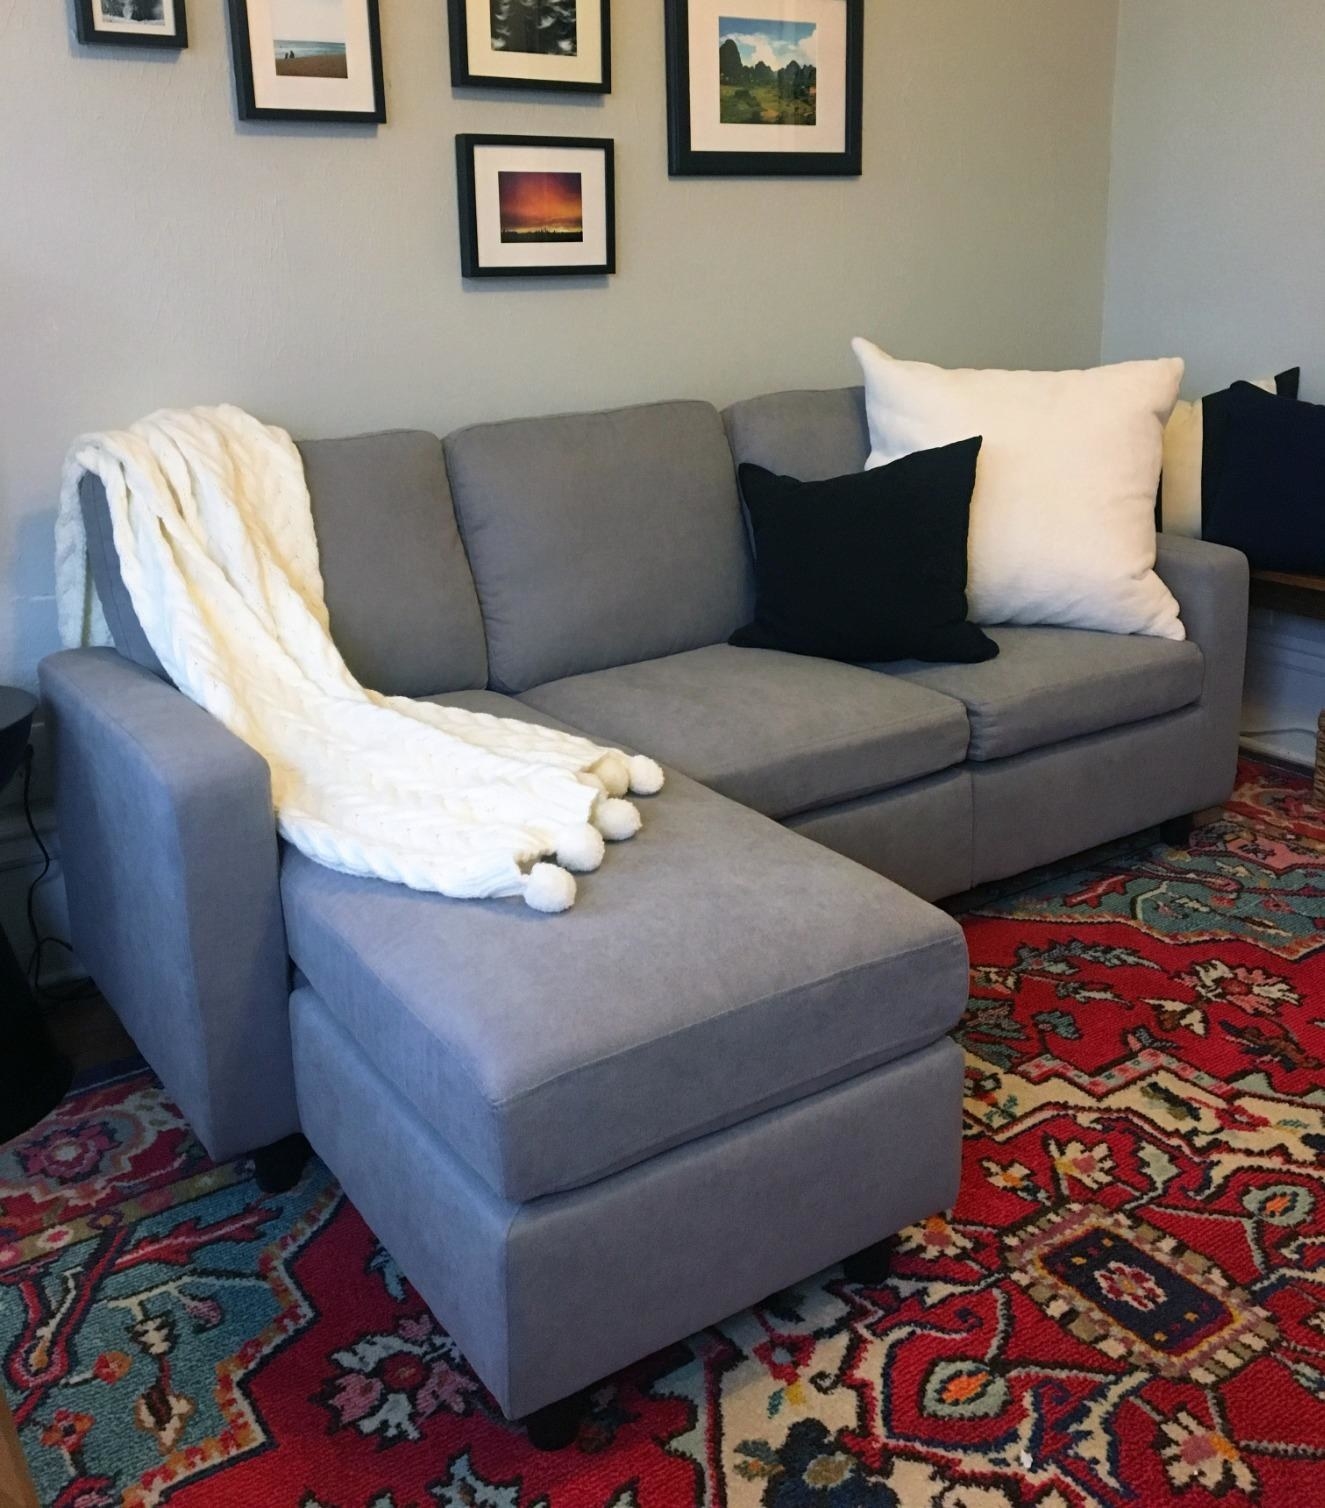 reviewer photo of a grey sectional couch in a living room with a white throw and pillows on top